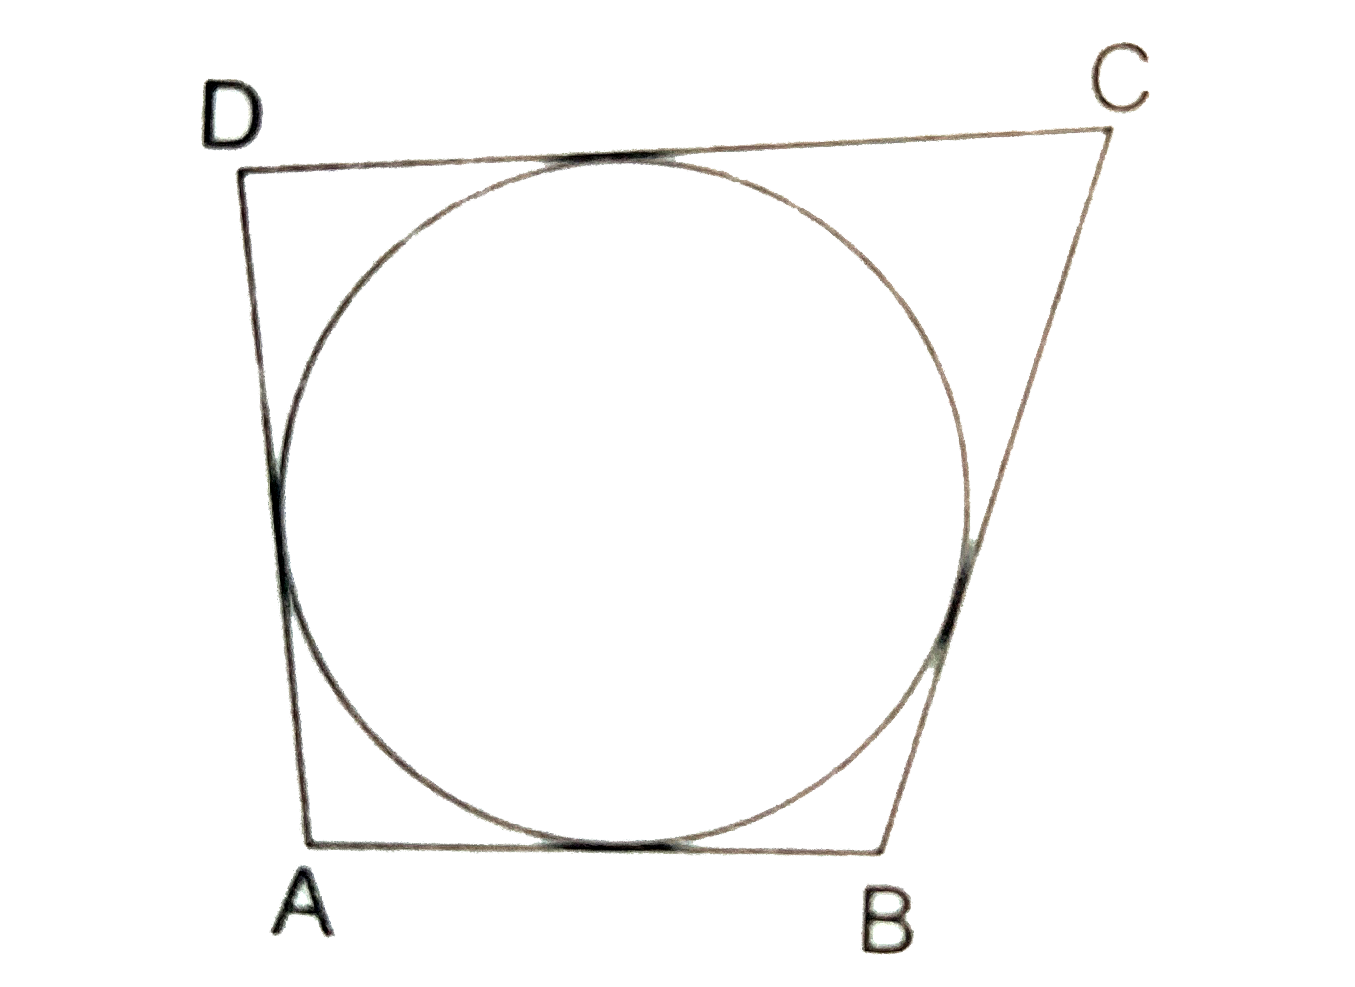 In the adjoining figure, a circle touches all the four sides of a quadrilateral ABCD whose sides are AB=6cm, BC=9cm and CD=8cm. Find the length of side AD.